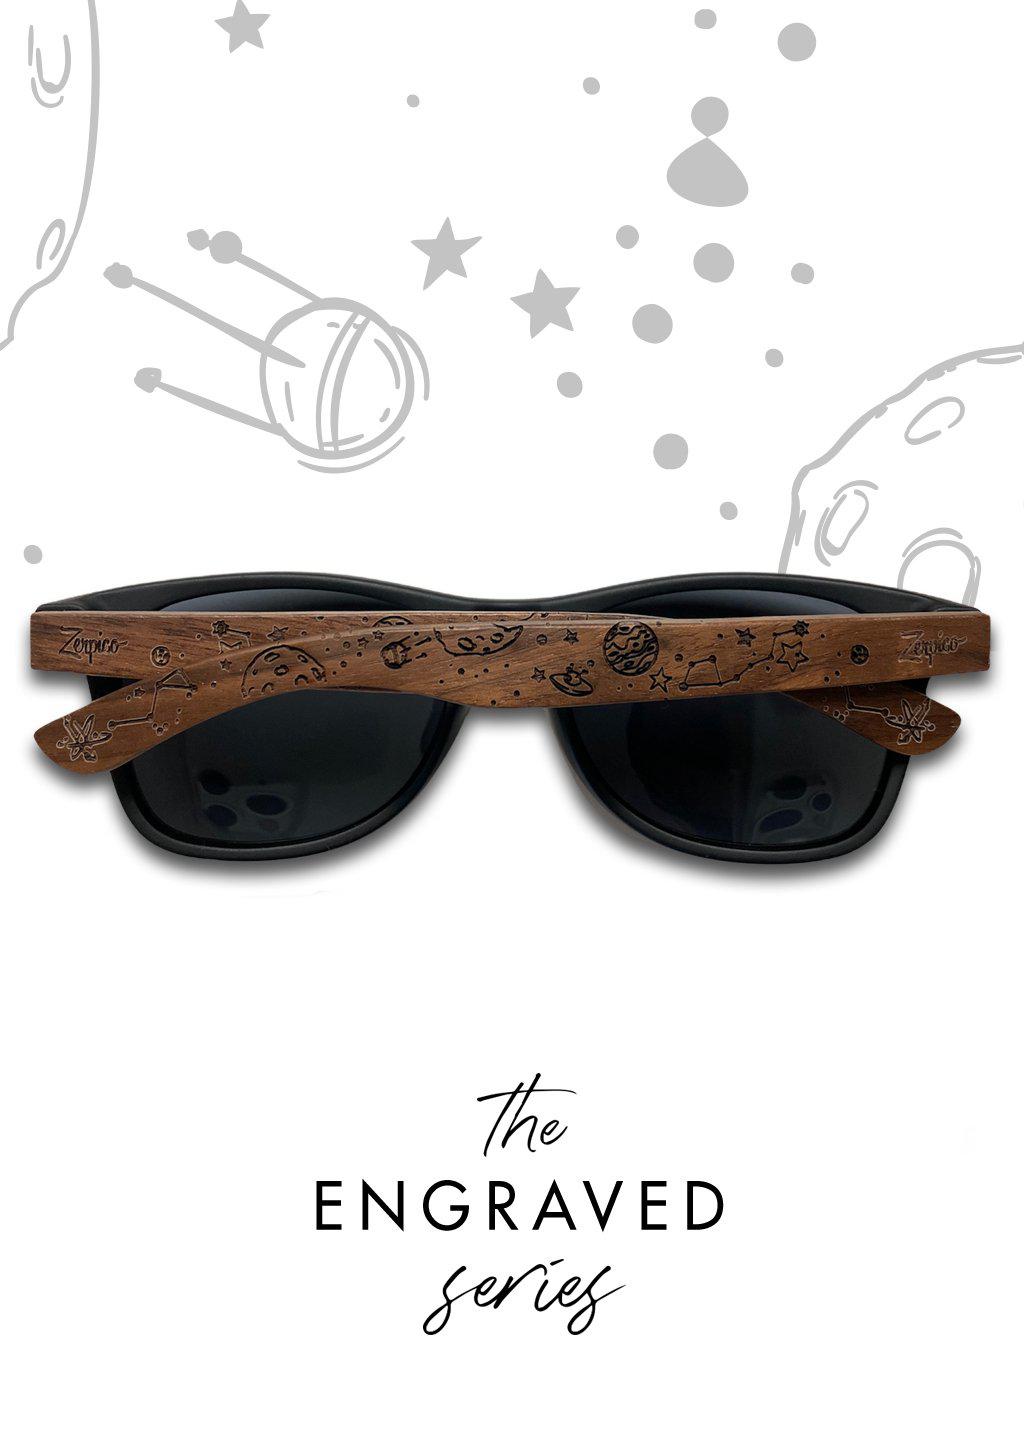 Our engraved sunglasses with motive from the stars and space.